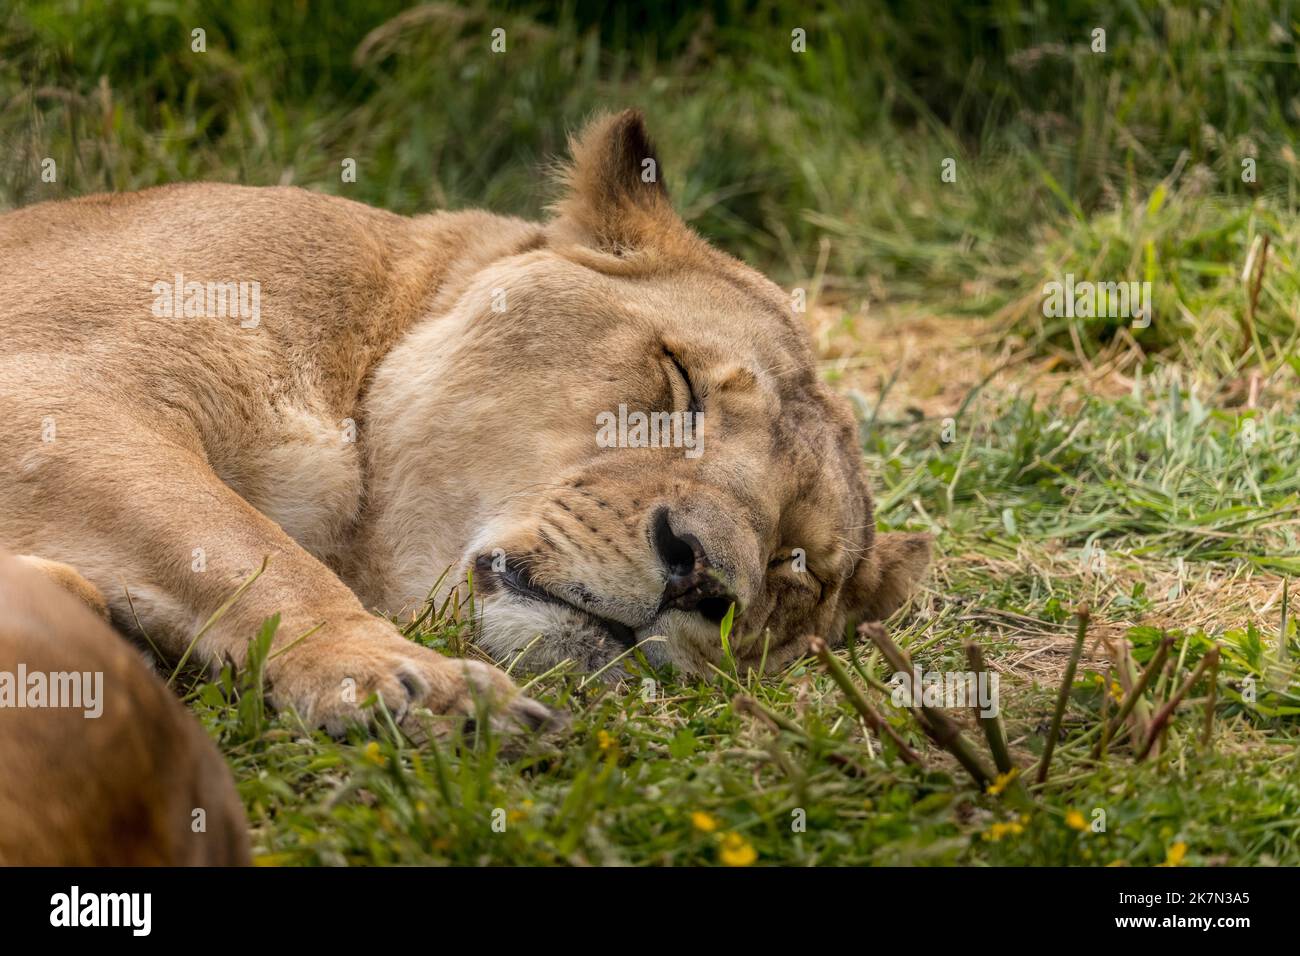 A closeup of a southwest African lion laying down on grass ground. Stock Photo